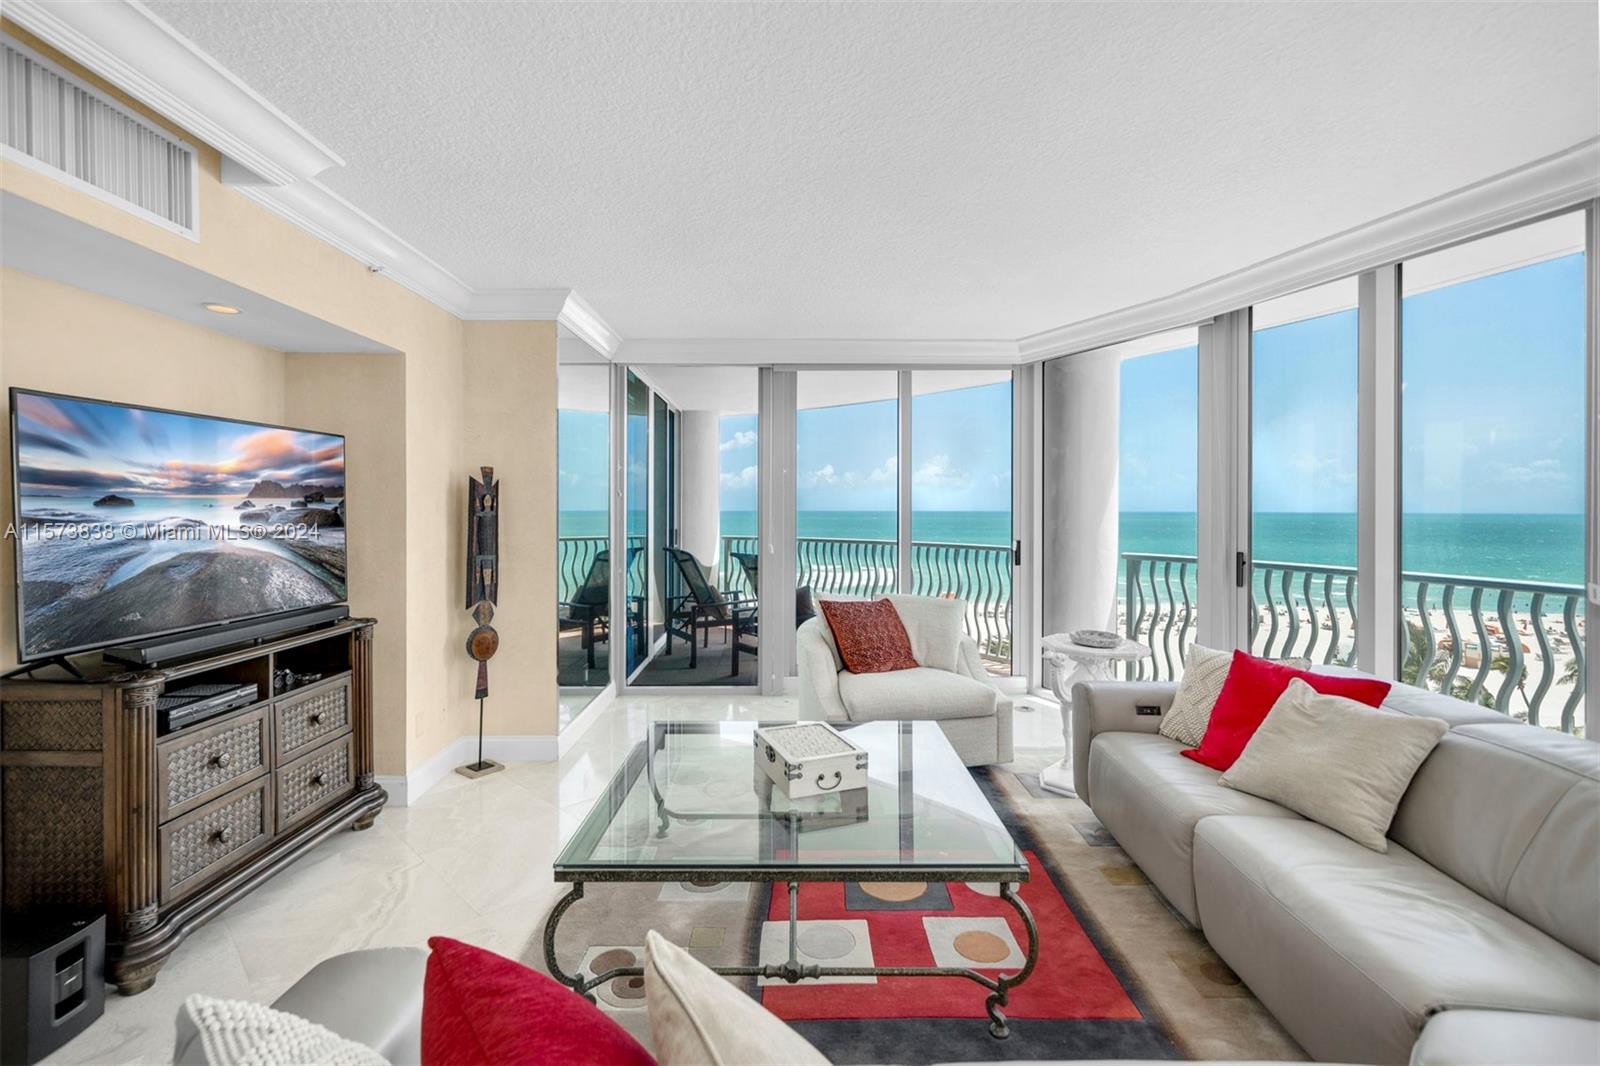 Enjoy gorgeous views of the Atlantic Ocean in this SE corner 3 bedroom residence located at 1500 Ocean. As an originator of luxury in Miami Beach, 1500 Ocean was designed by renowned architect, Michael Graves. This spacious 2,000+ SF residence features an oceanfront primary suite with separate jacuzzi tub and shower, marble floors and a custom kitchen. 1500 Ocean is a full service luxury building with 24 hr. security, valet and front desk attendant, concierge, gym with sauna and steam room and private beach. This property is available as of 5/15/2024 - 11/30/2024